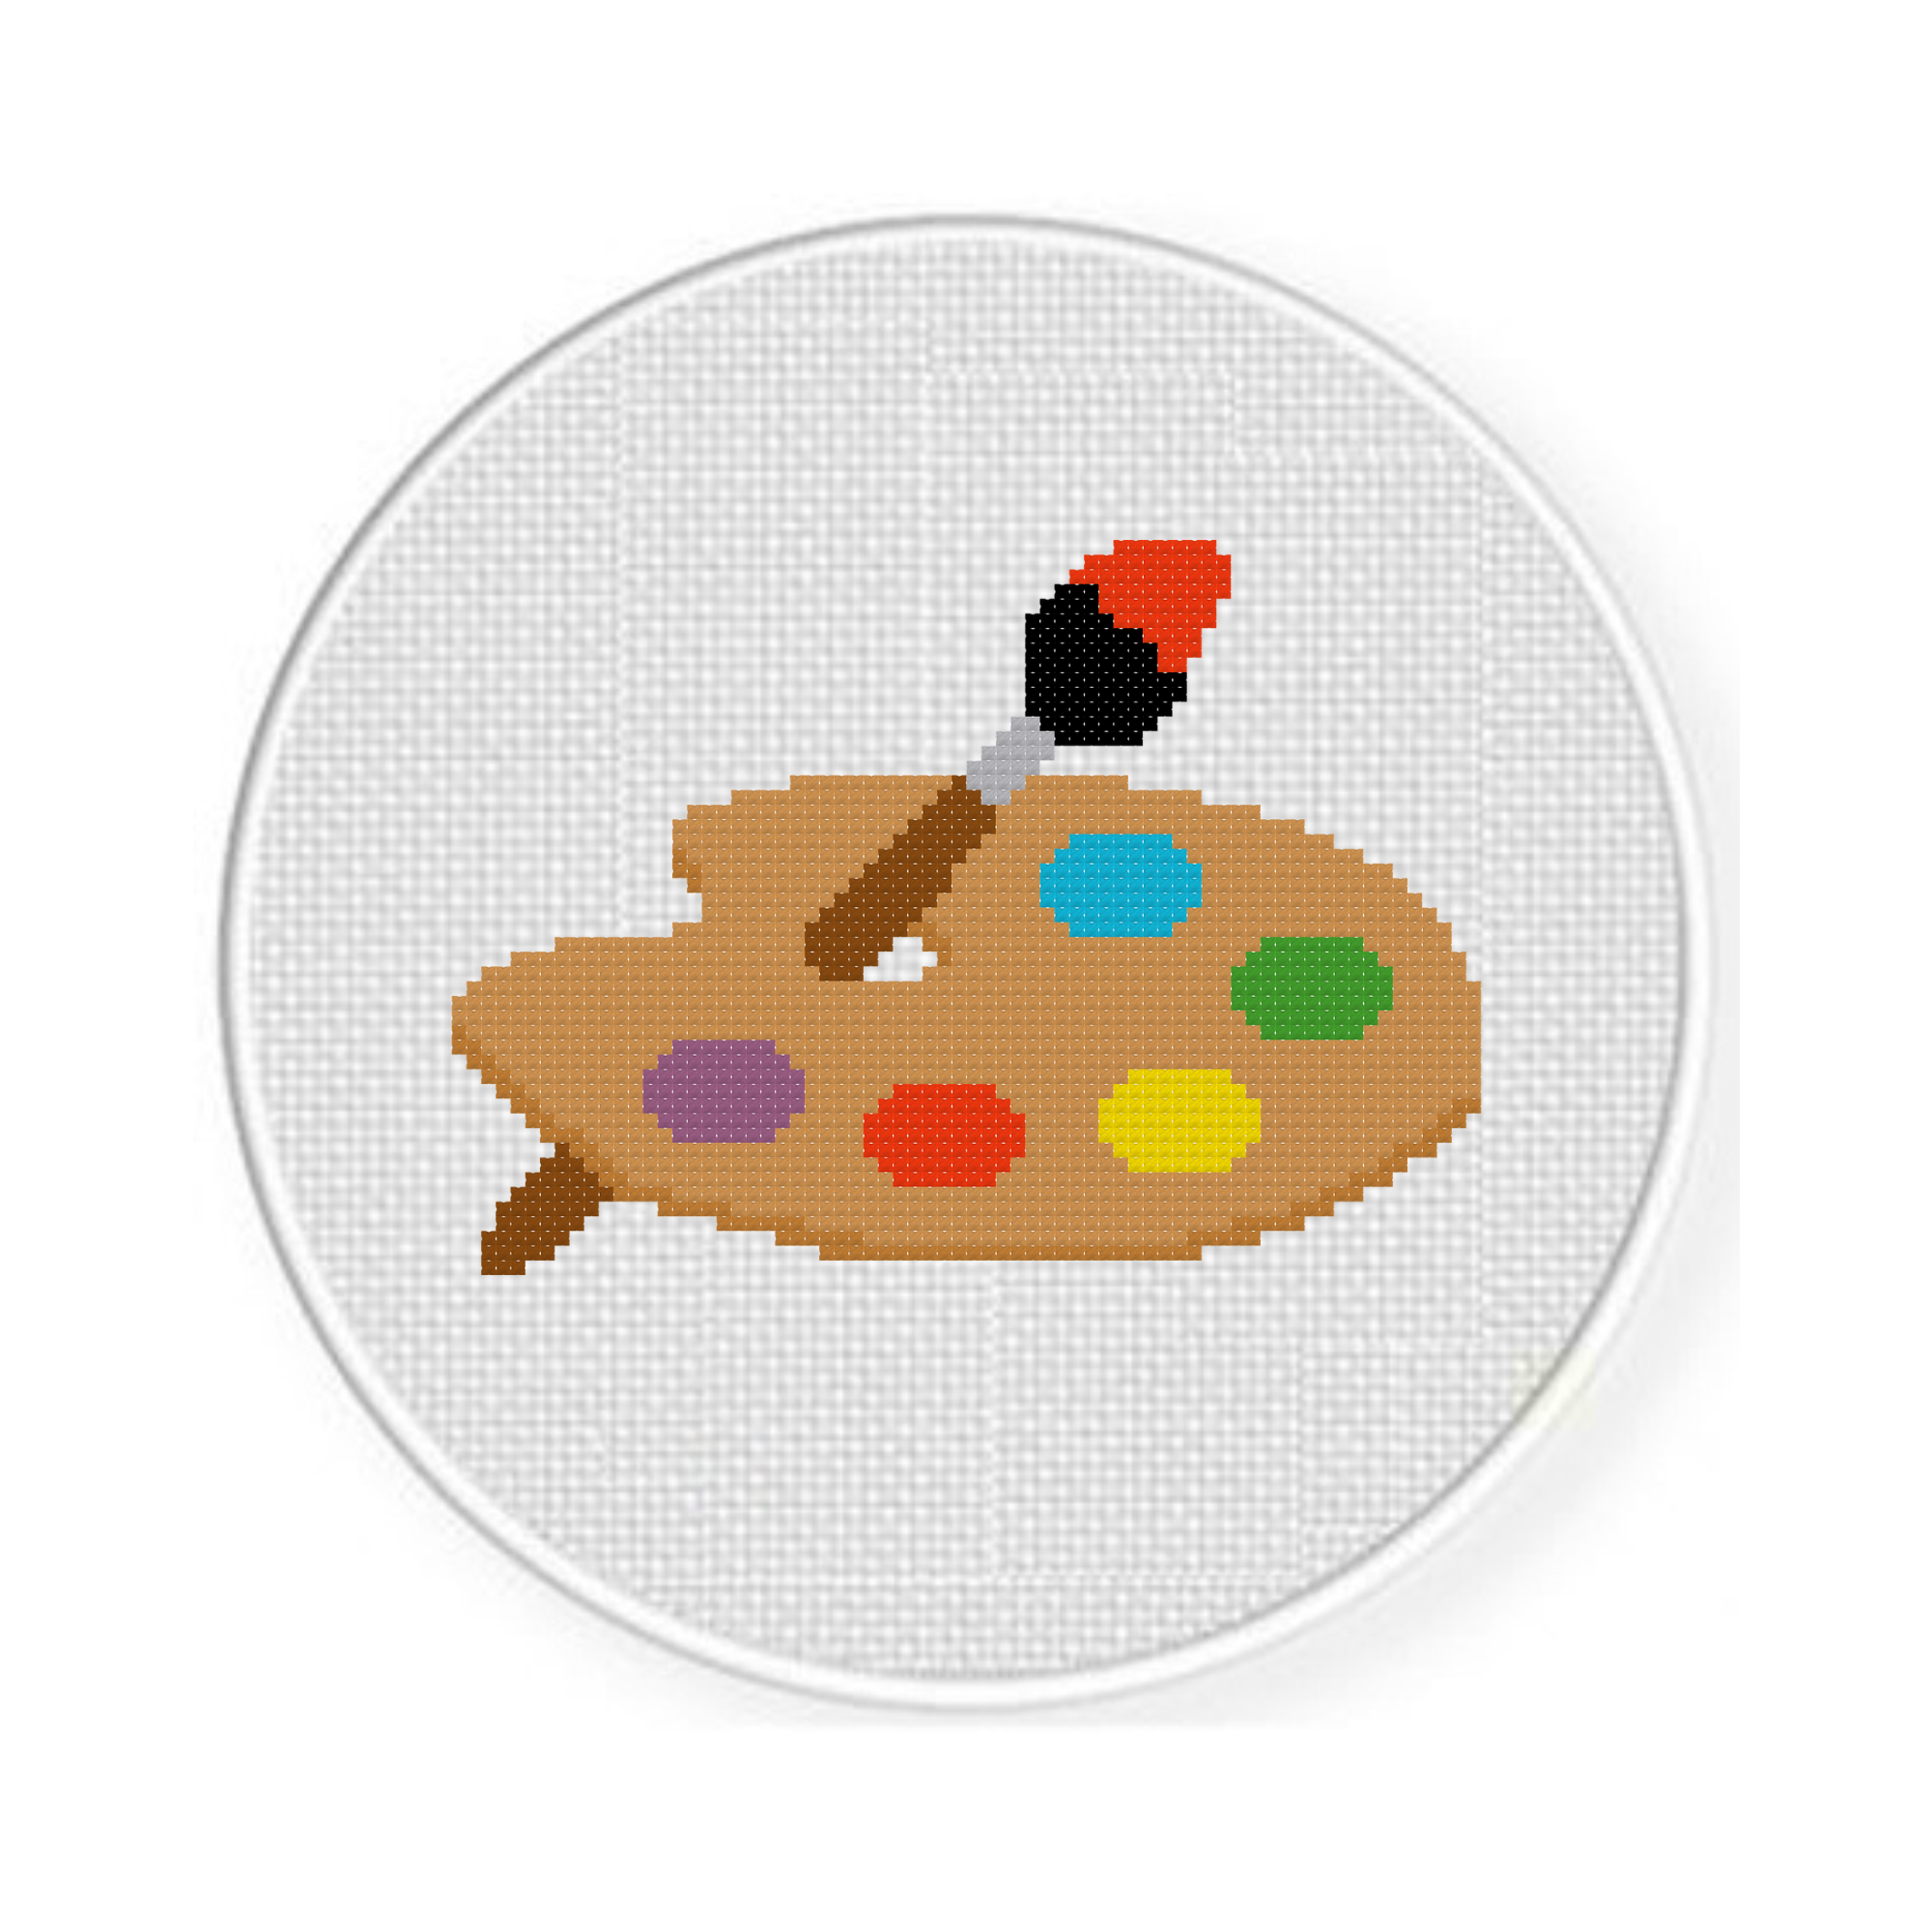 Palette Art Painting, painting, food, painting, palette png